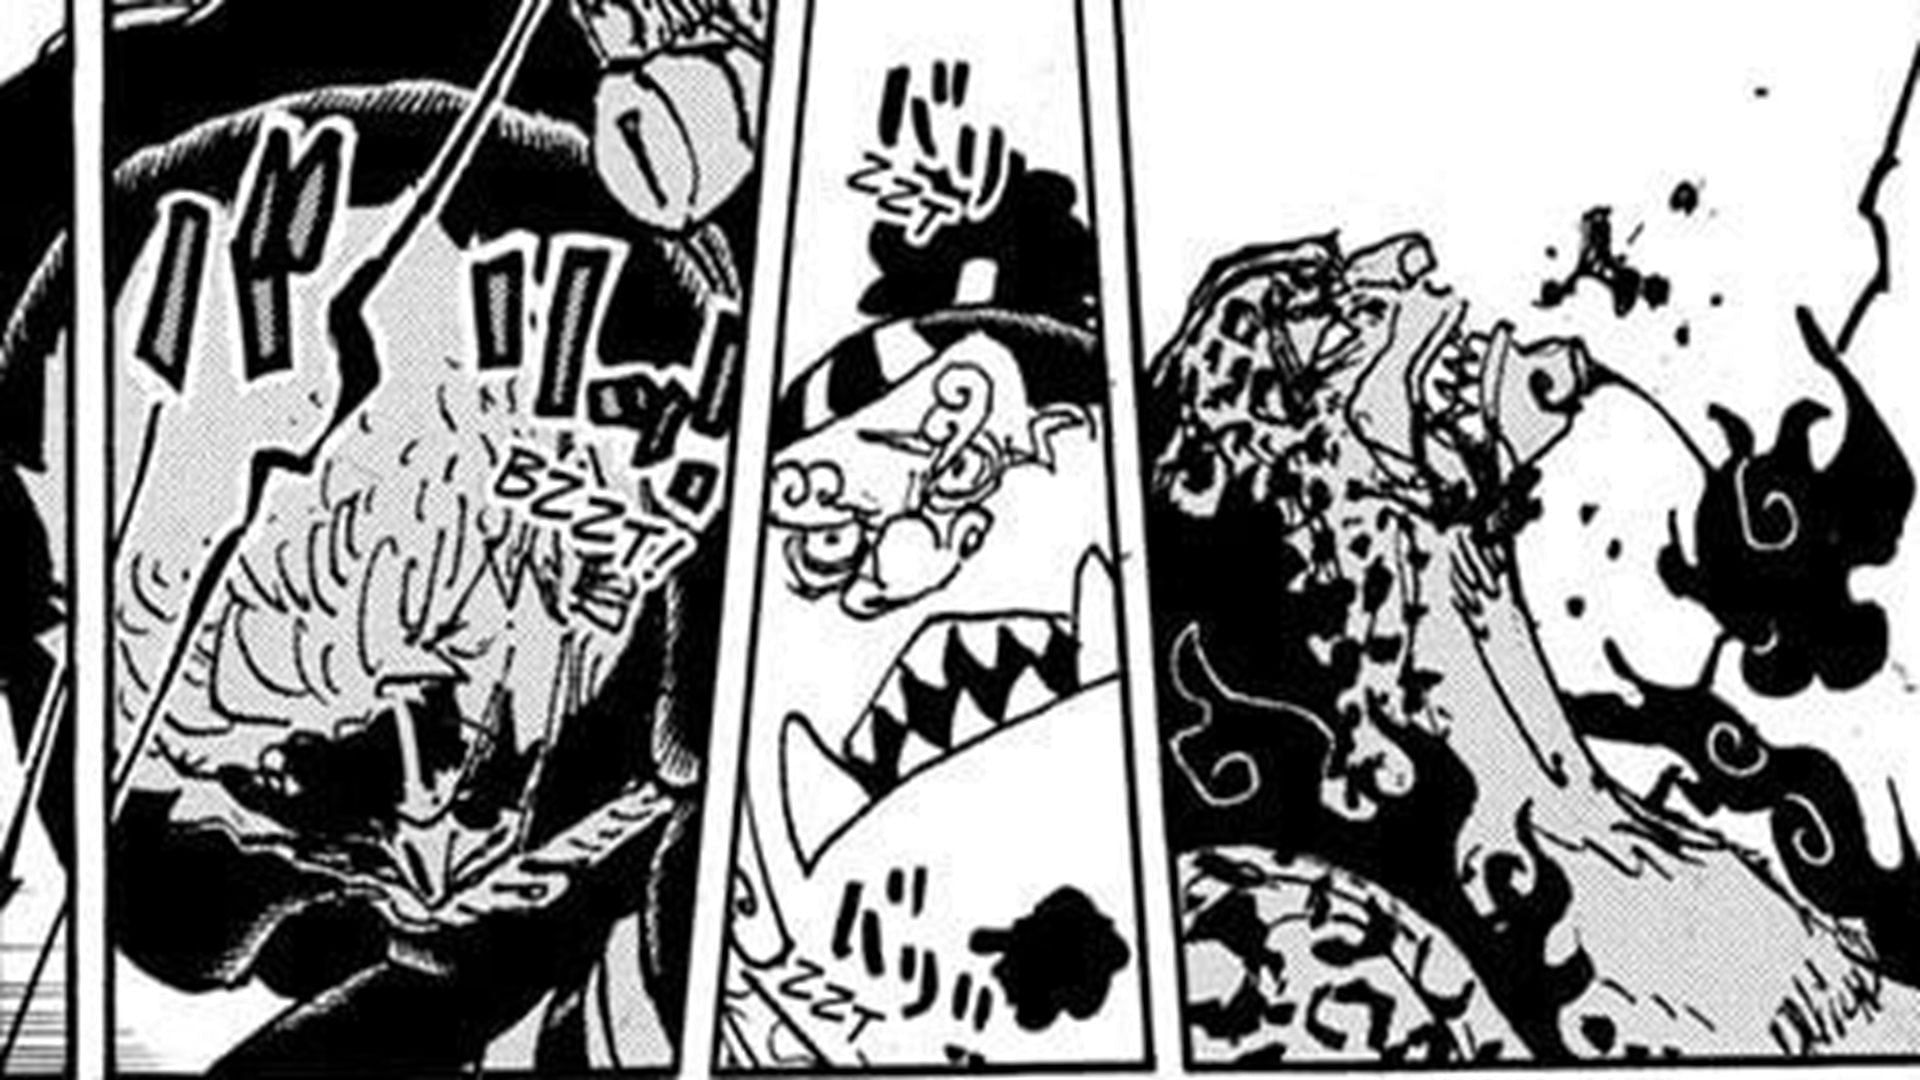 The end of the fight between Zoro and Lucci in the One Piece manga (Image via Shueisha)